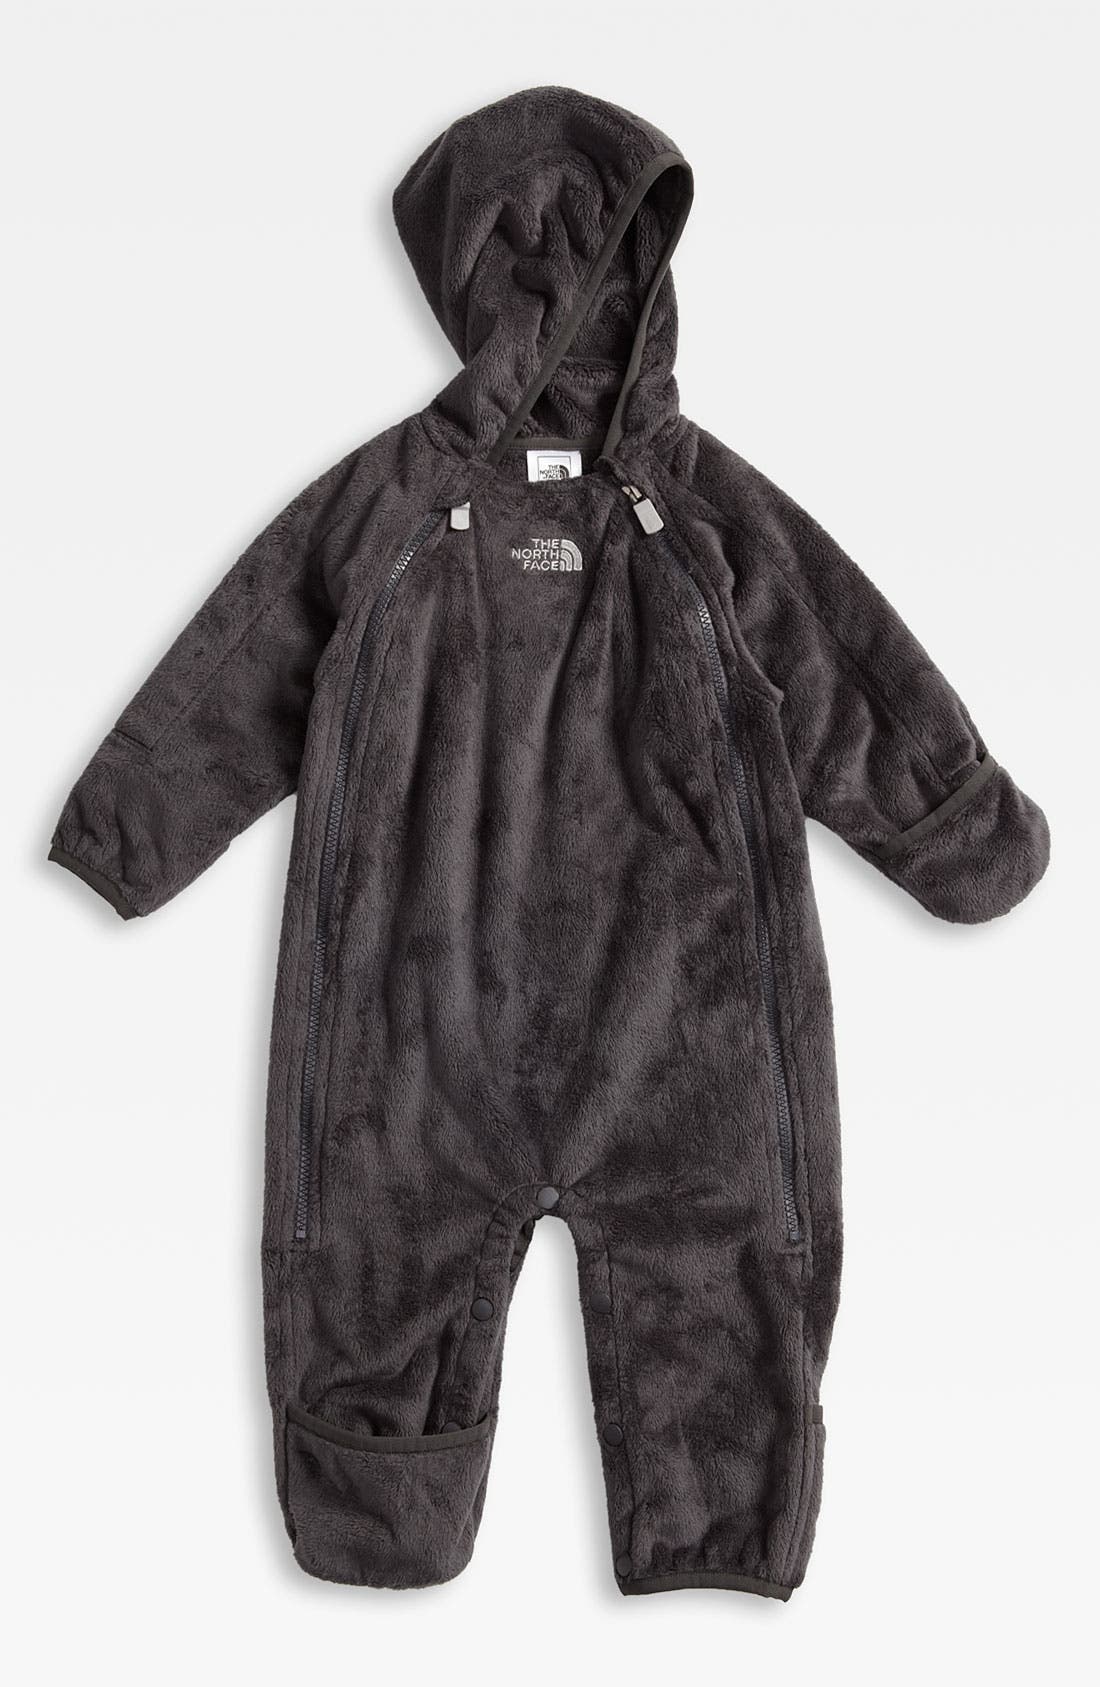 north face infant fleece bunting